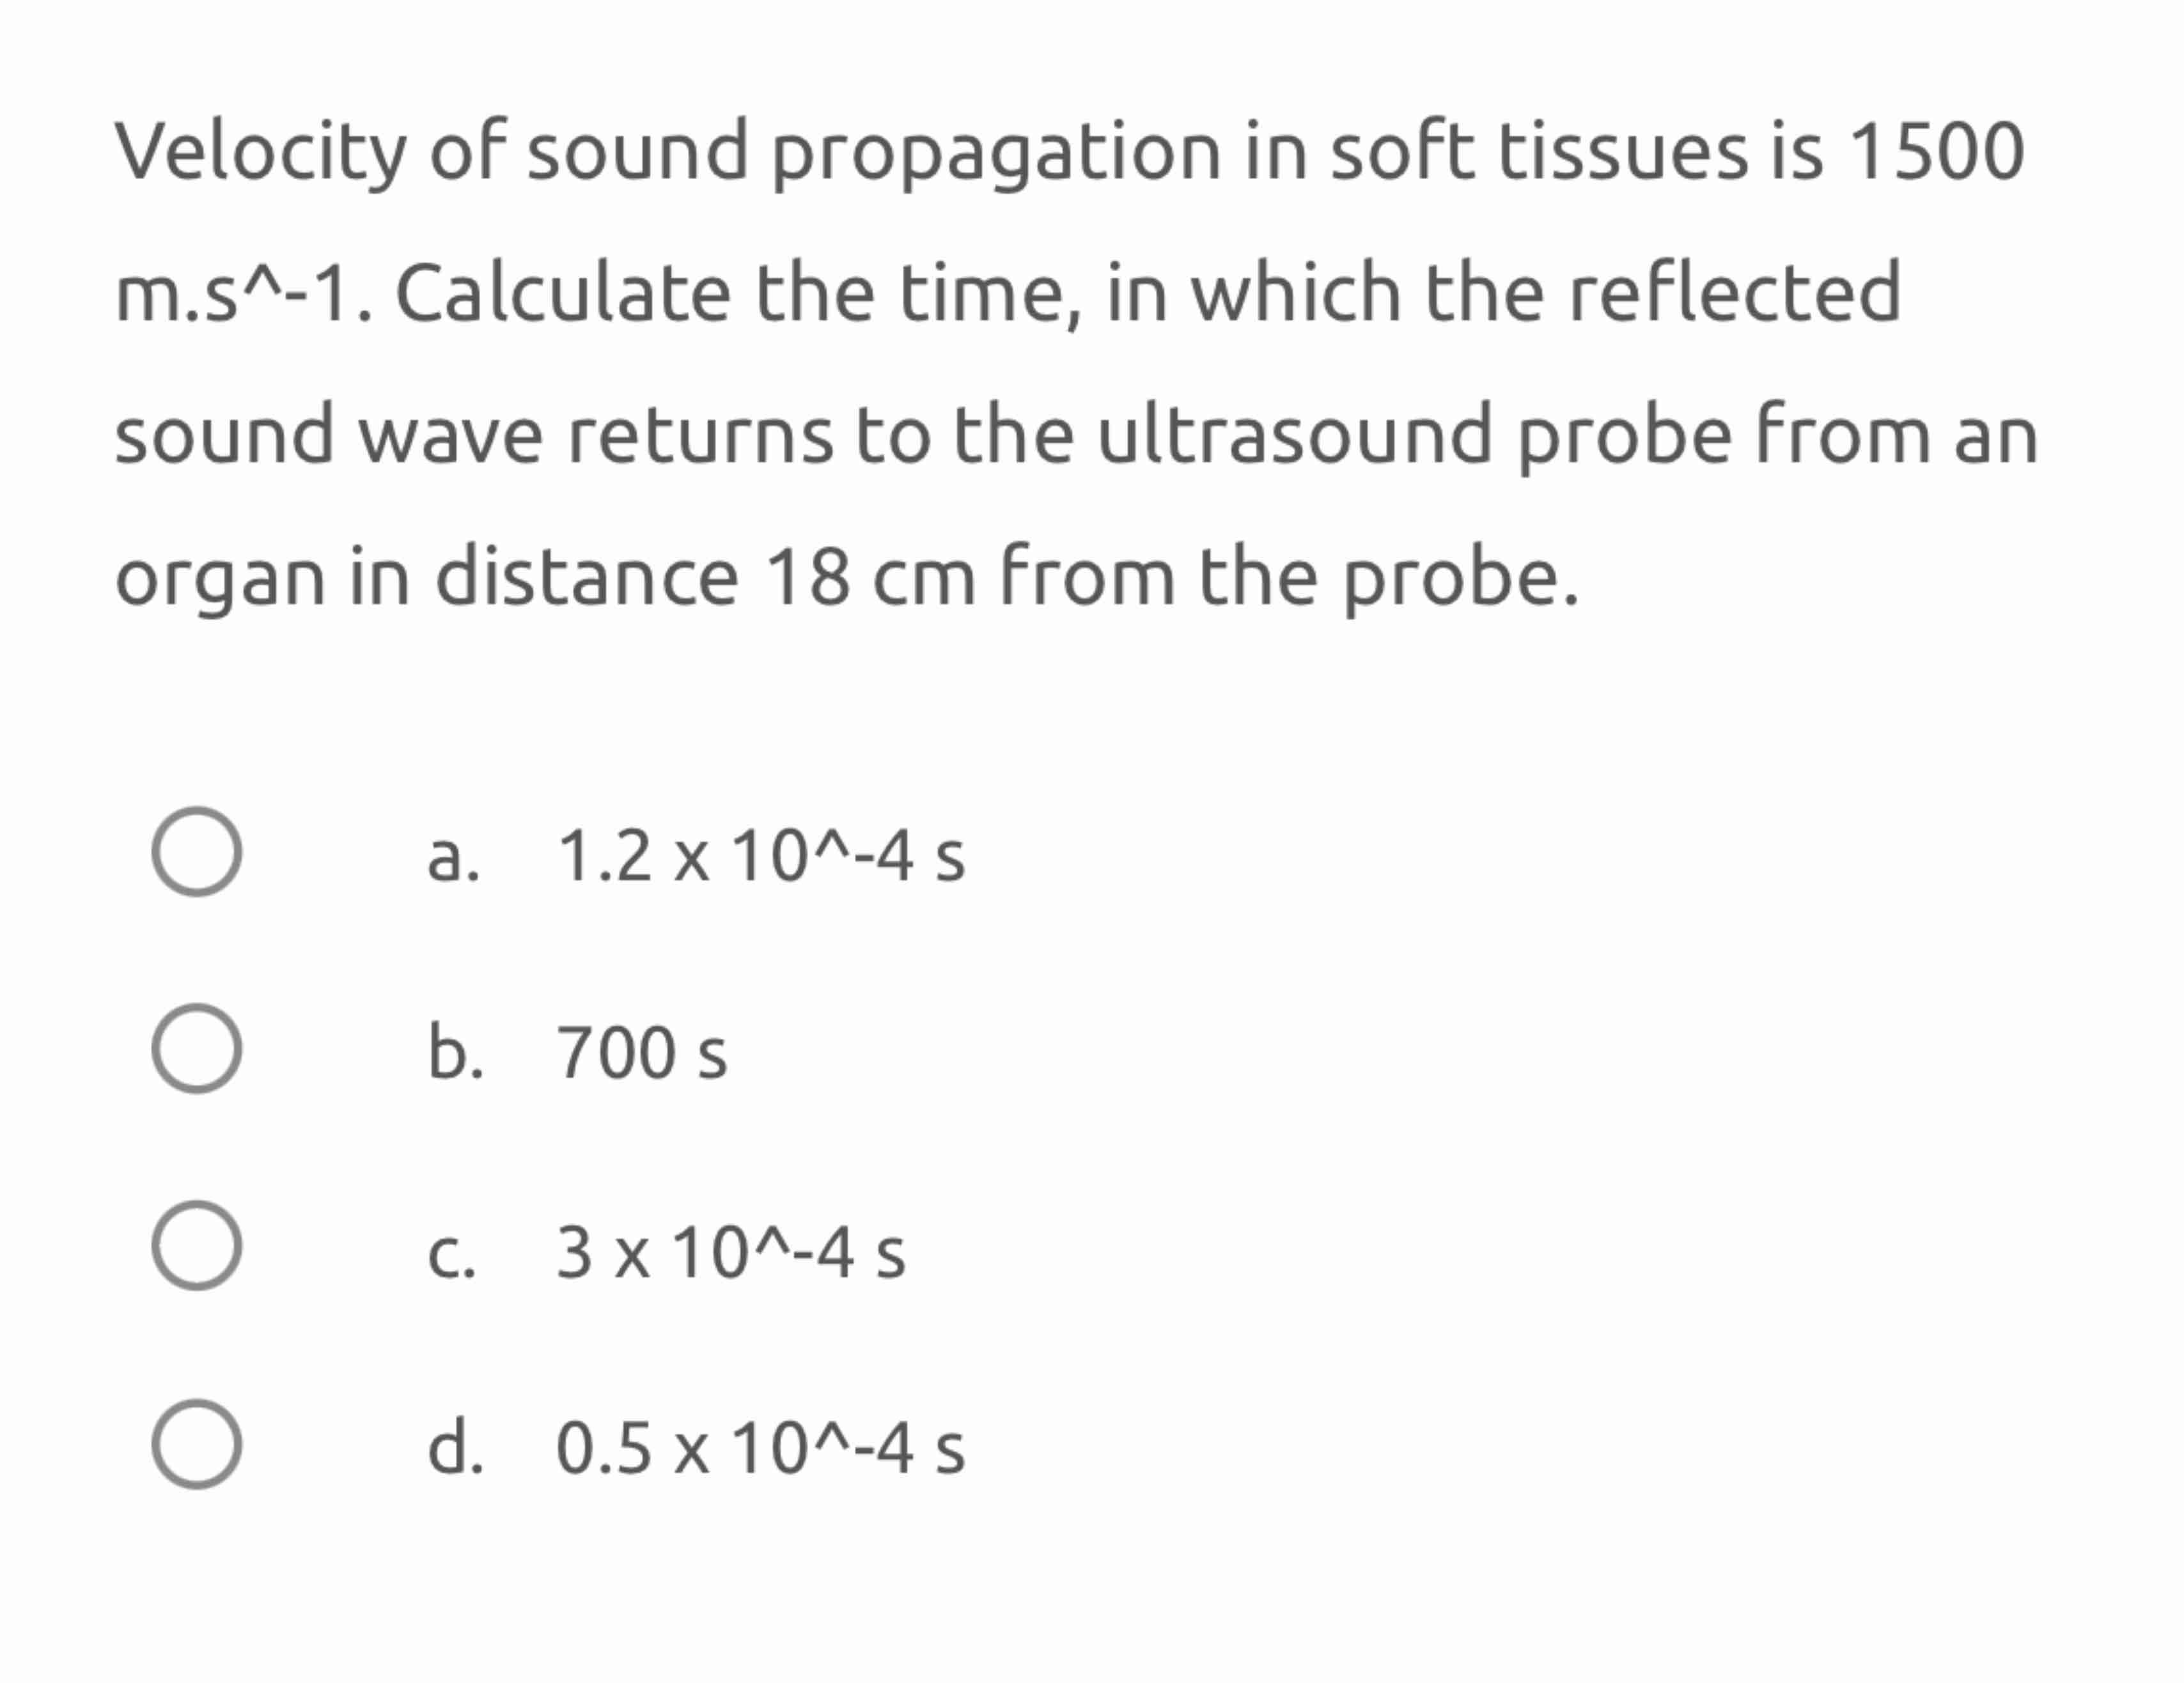 Velocity of sound propagation in soft tissues is 1500 m.s^-1. Calculate the time, in which the reflected